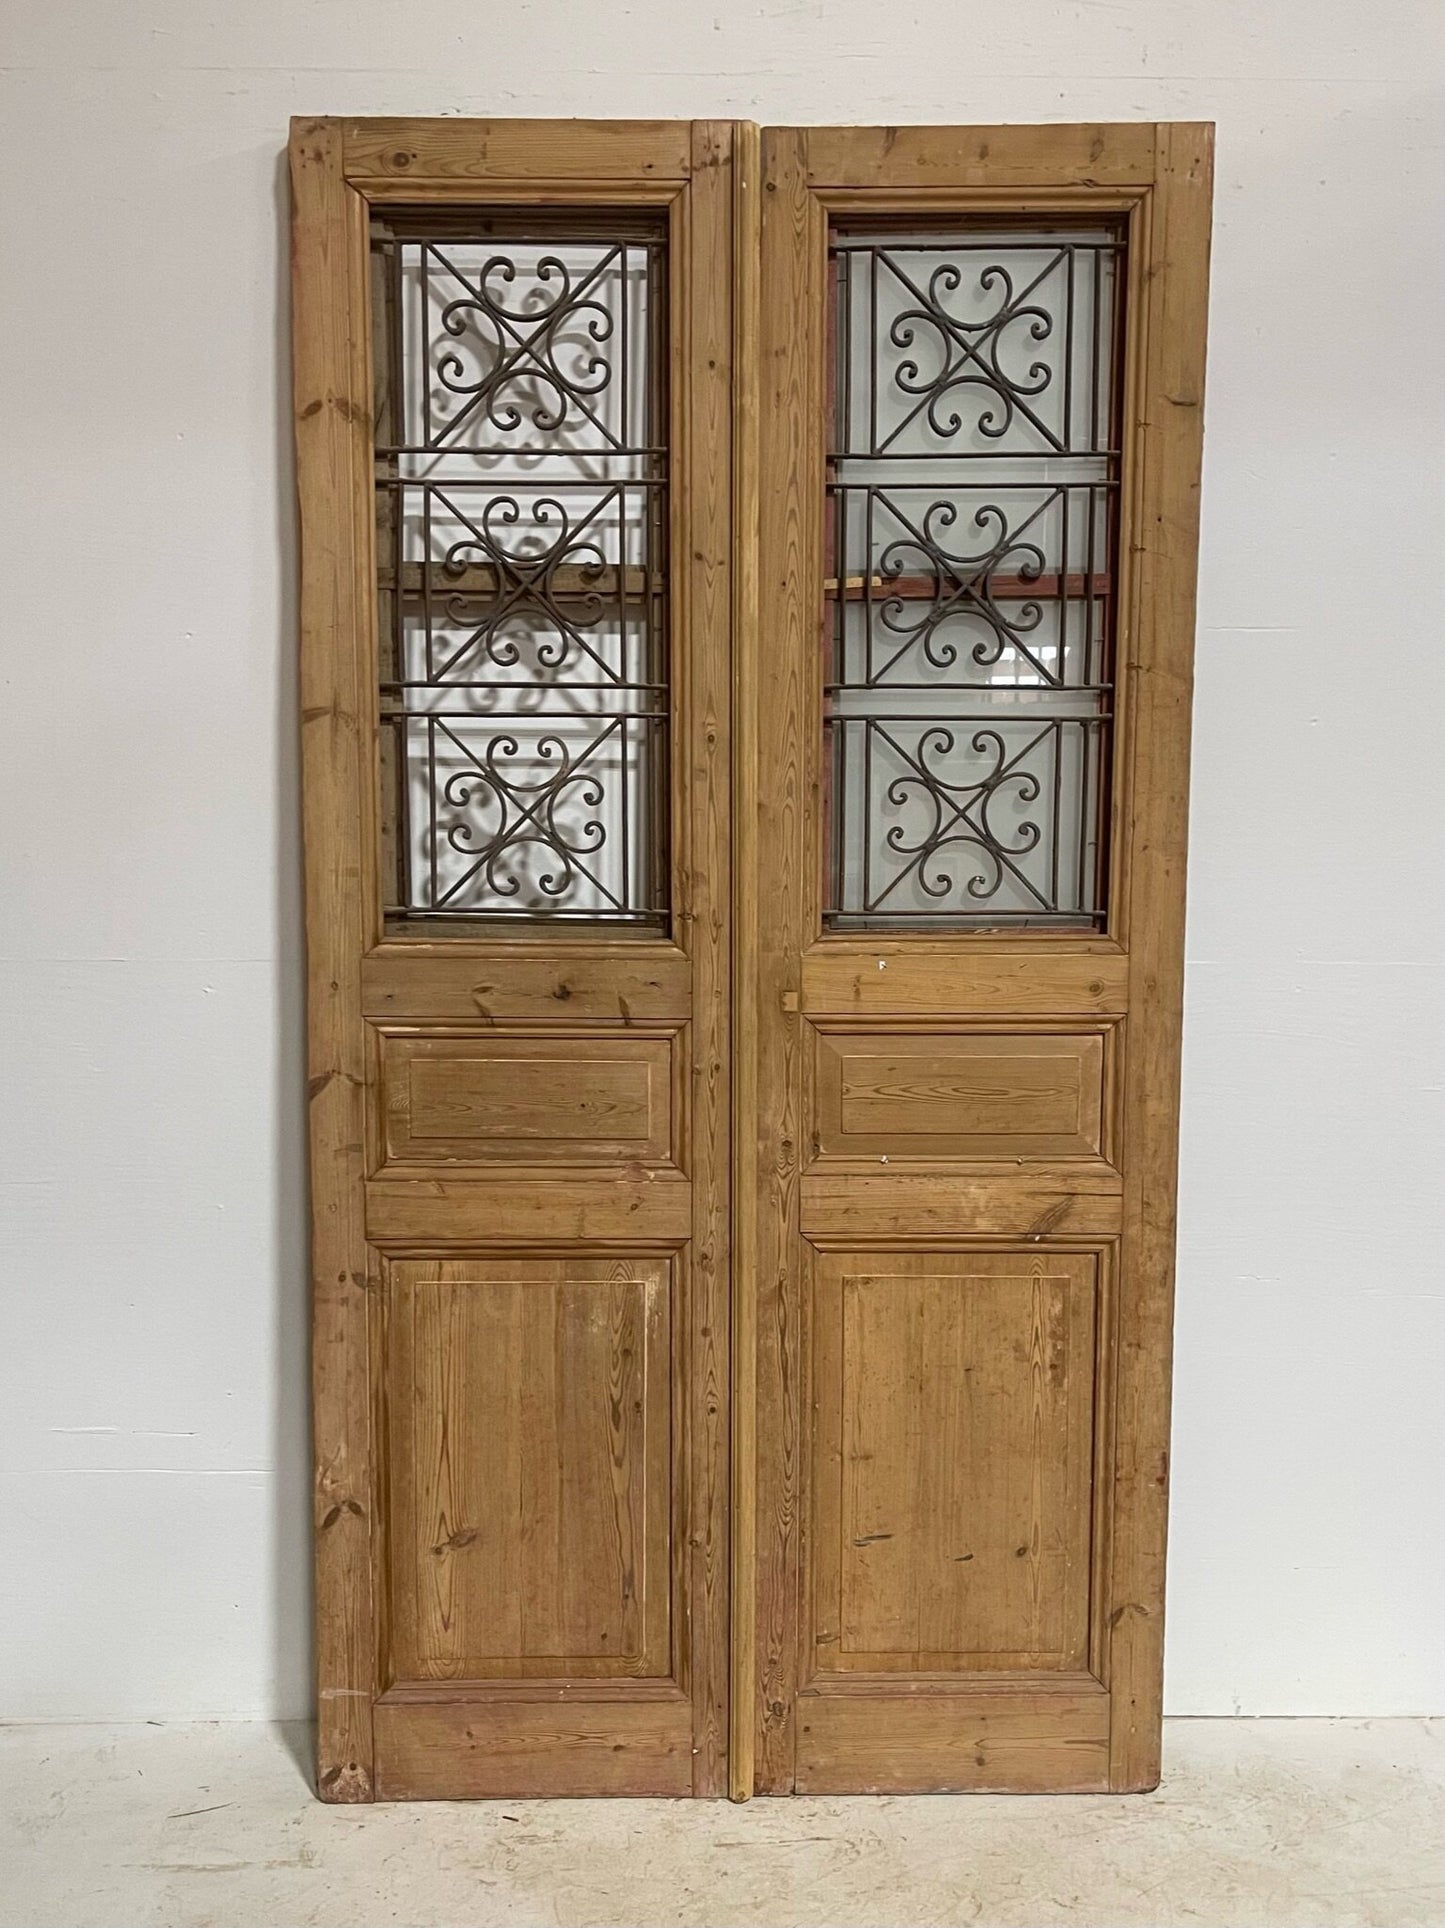 Antique French doors (92.75X48.75) with metal G0981